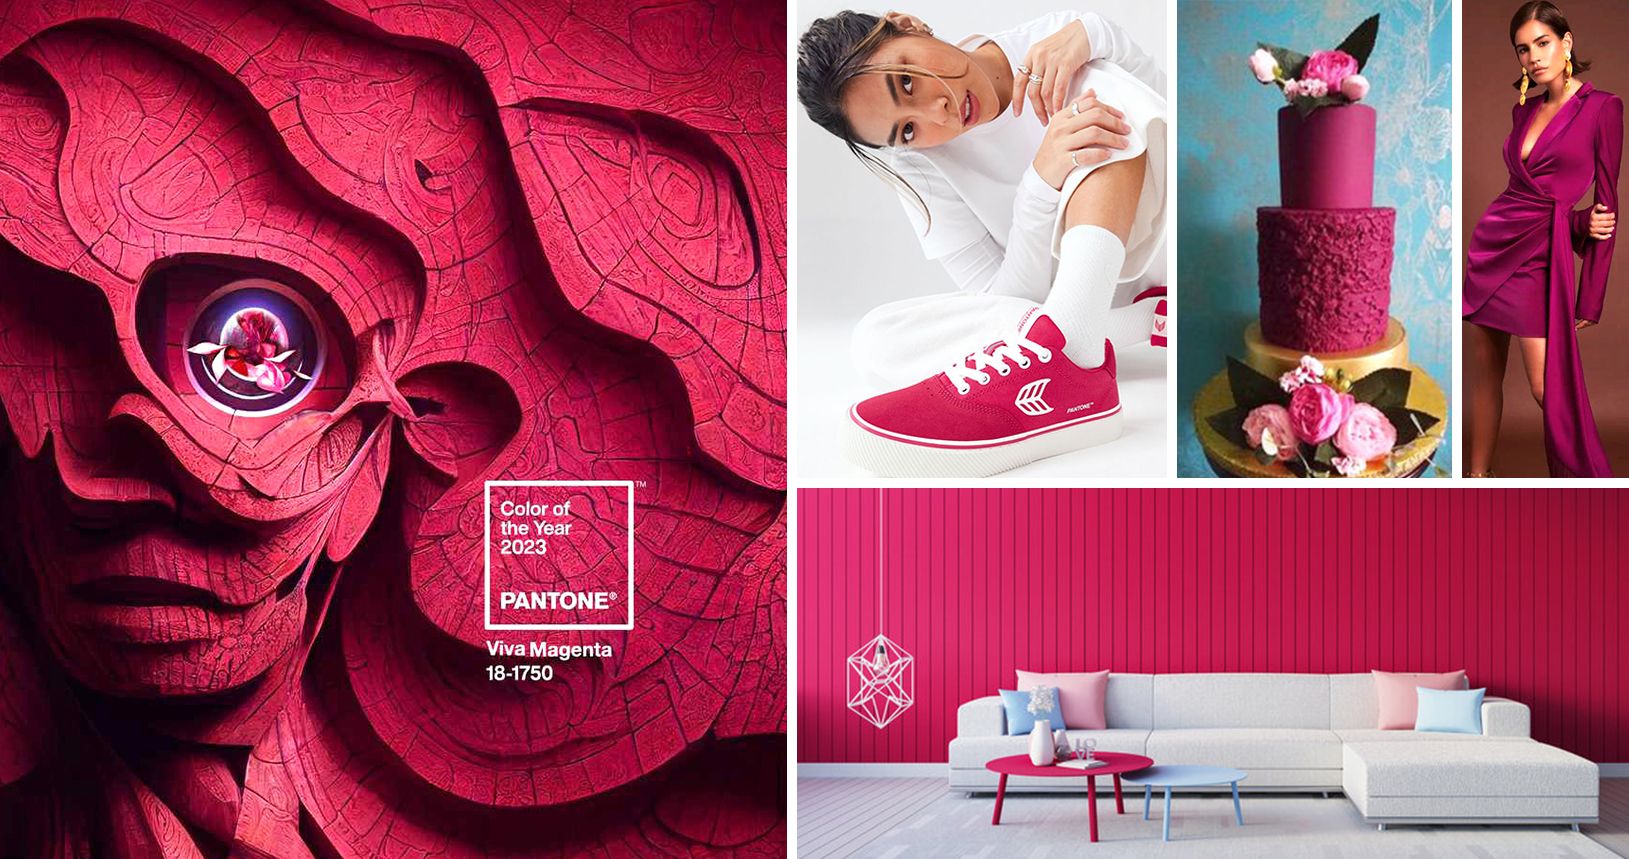 Viva Magenta - Pantone's Color Of The Year For 2023